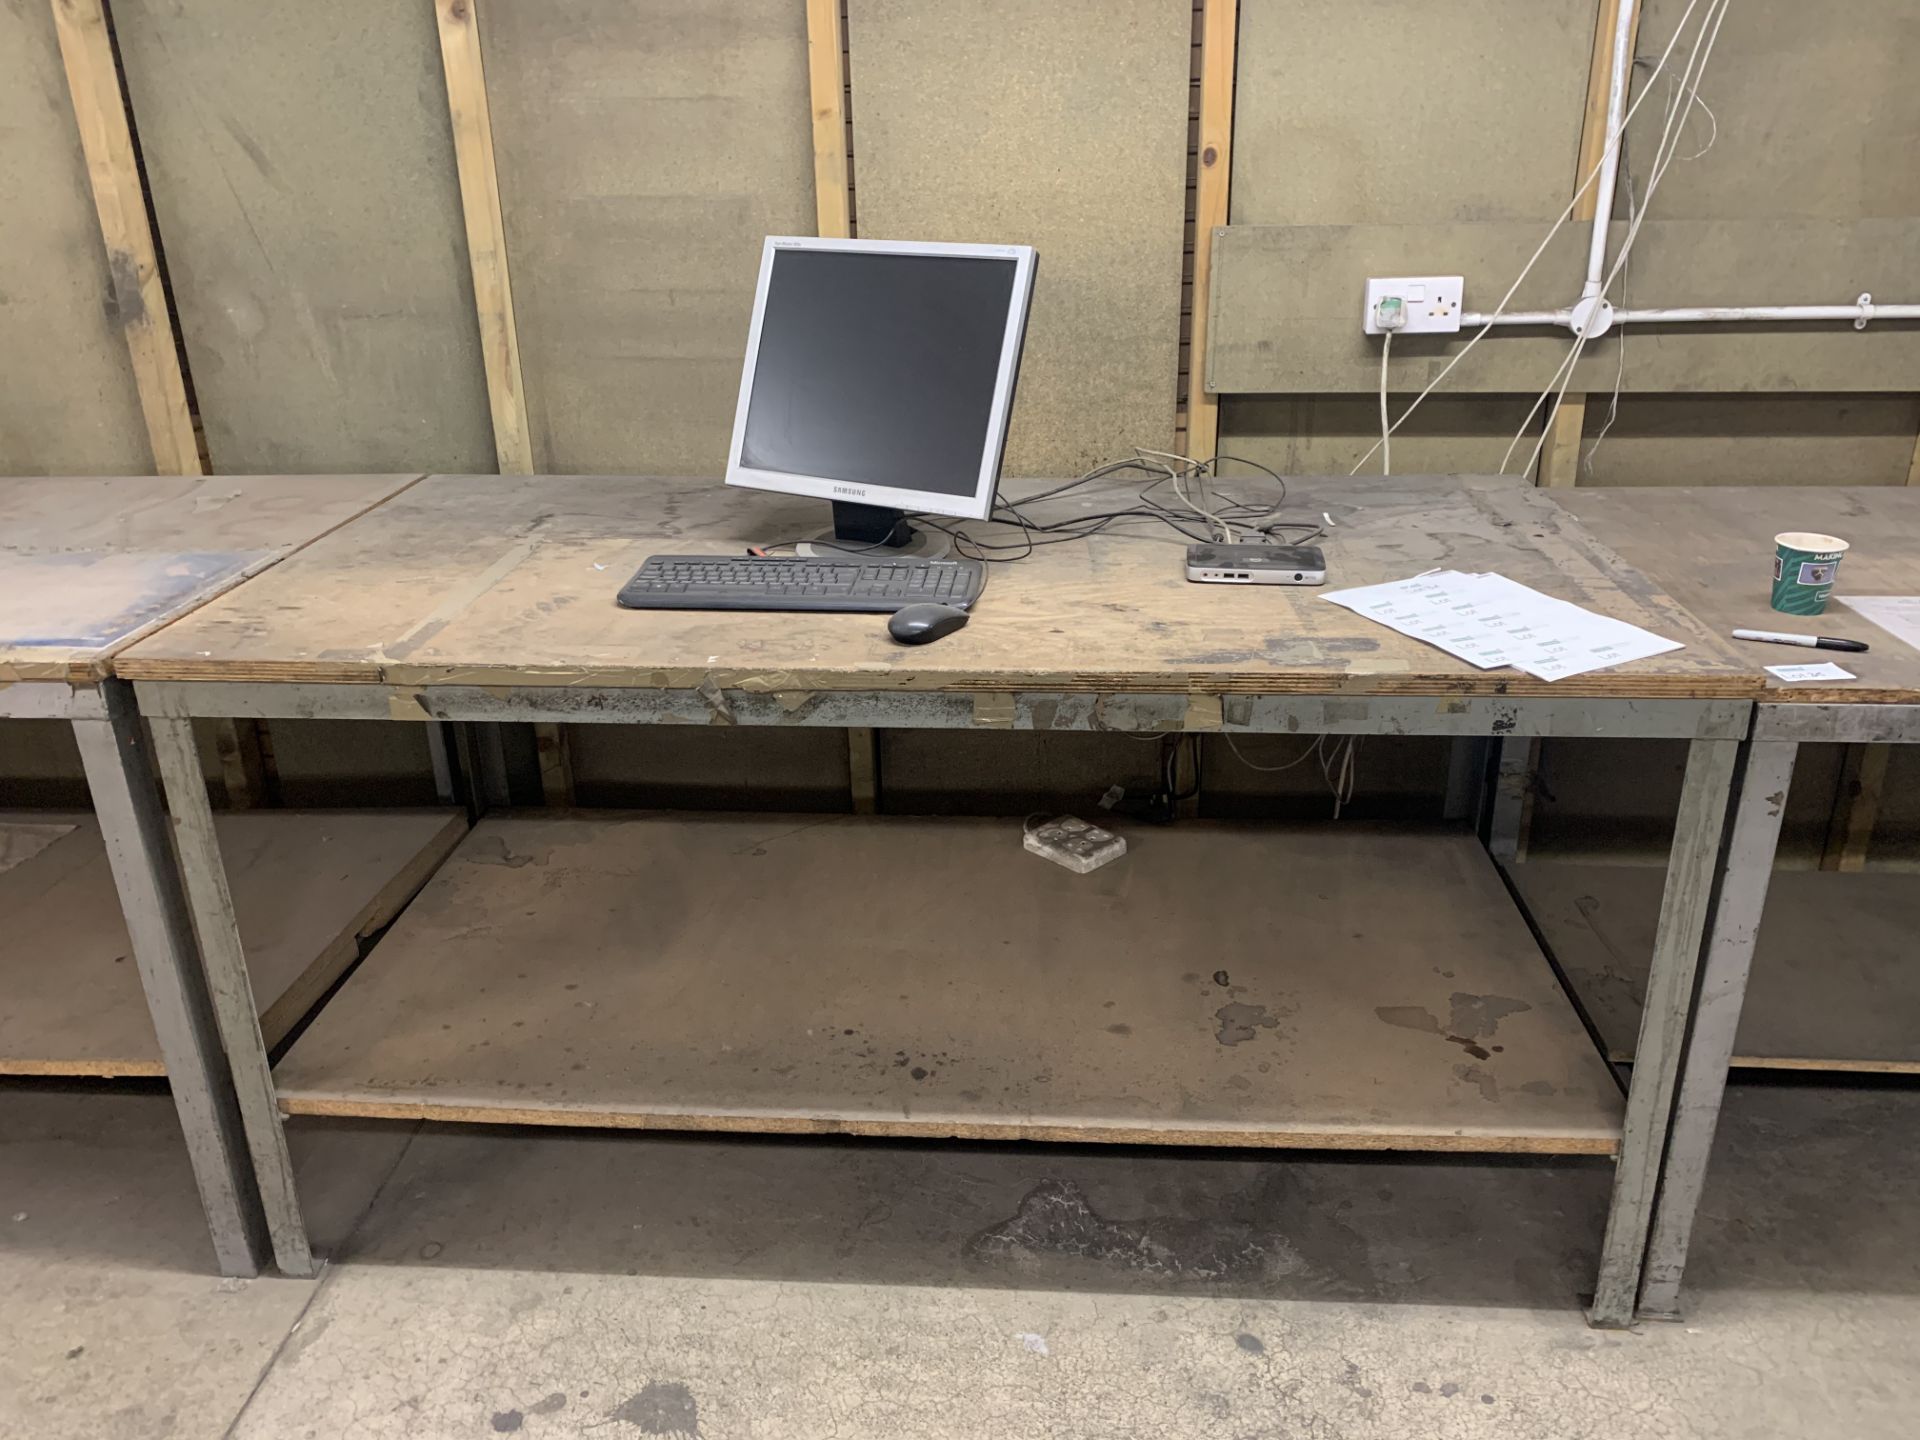 10 METAL WORK STATIONS SIZE APPROX 185CM(L) X 90CM(D) X 90CM(H) CONTENTS NOT INCLUDED - Image 2 of 2